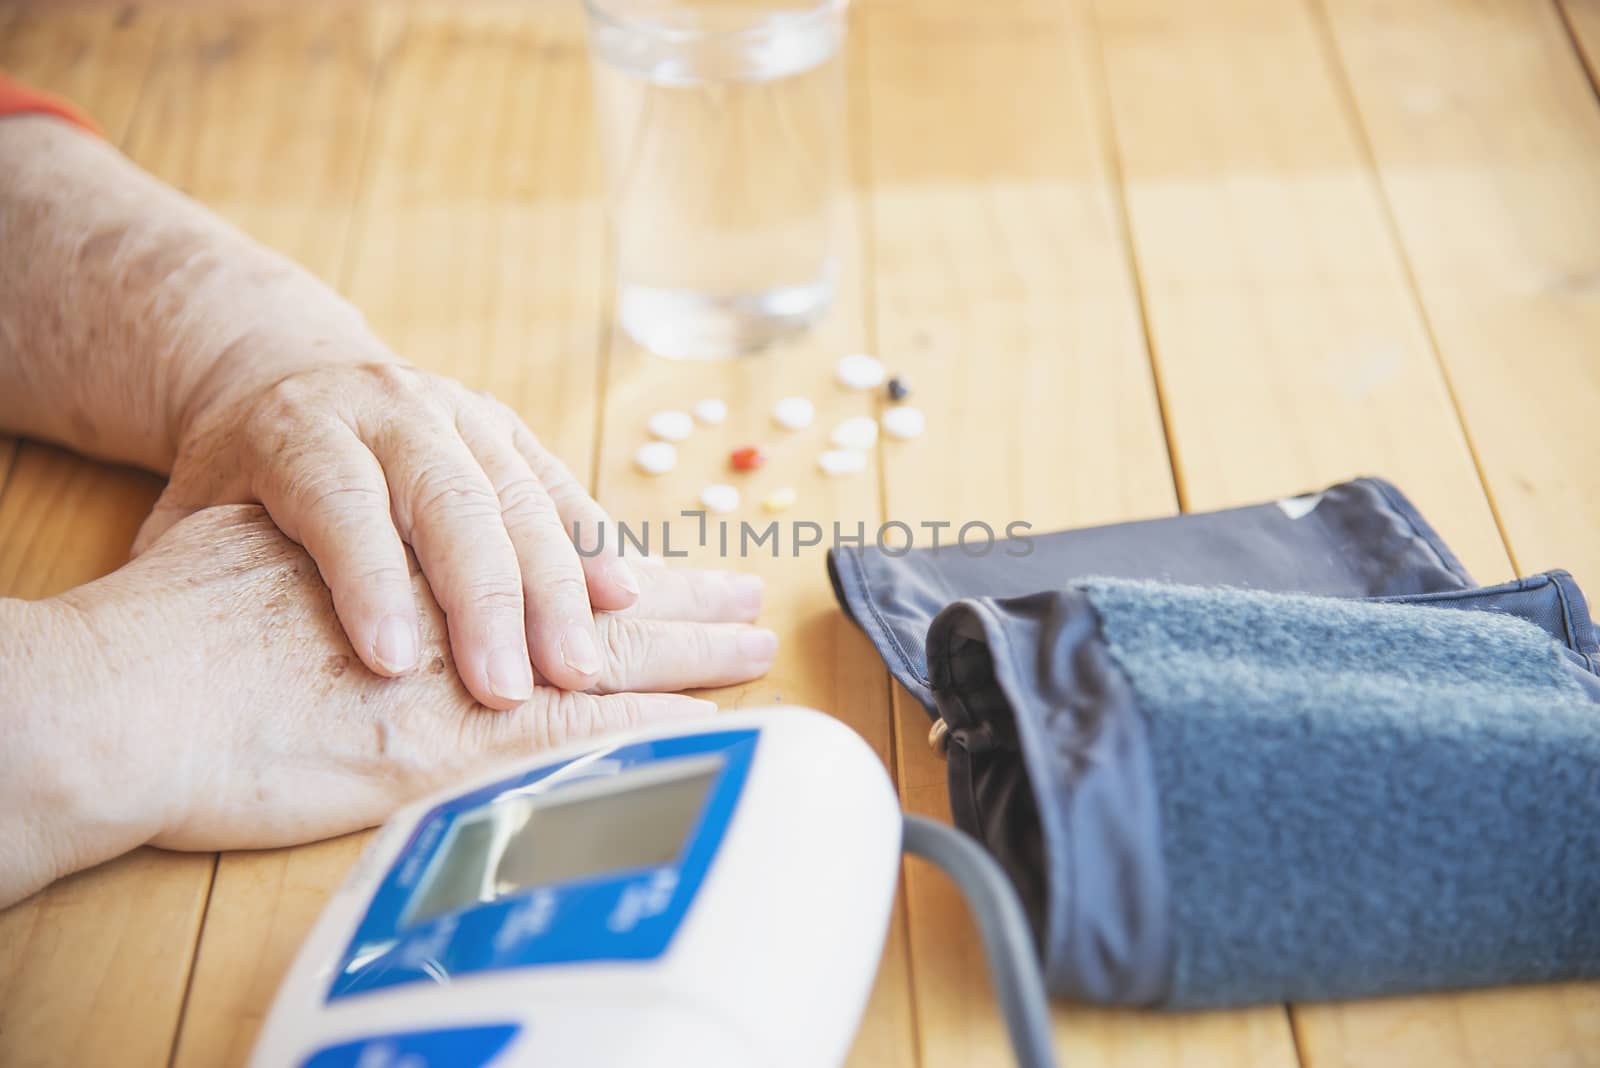 Old lady is being checked blood pressure using blood pressure monitor kid set - people with health care medical instrument set concept by pairhandmade